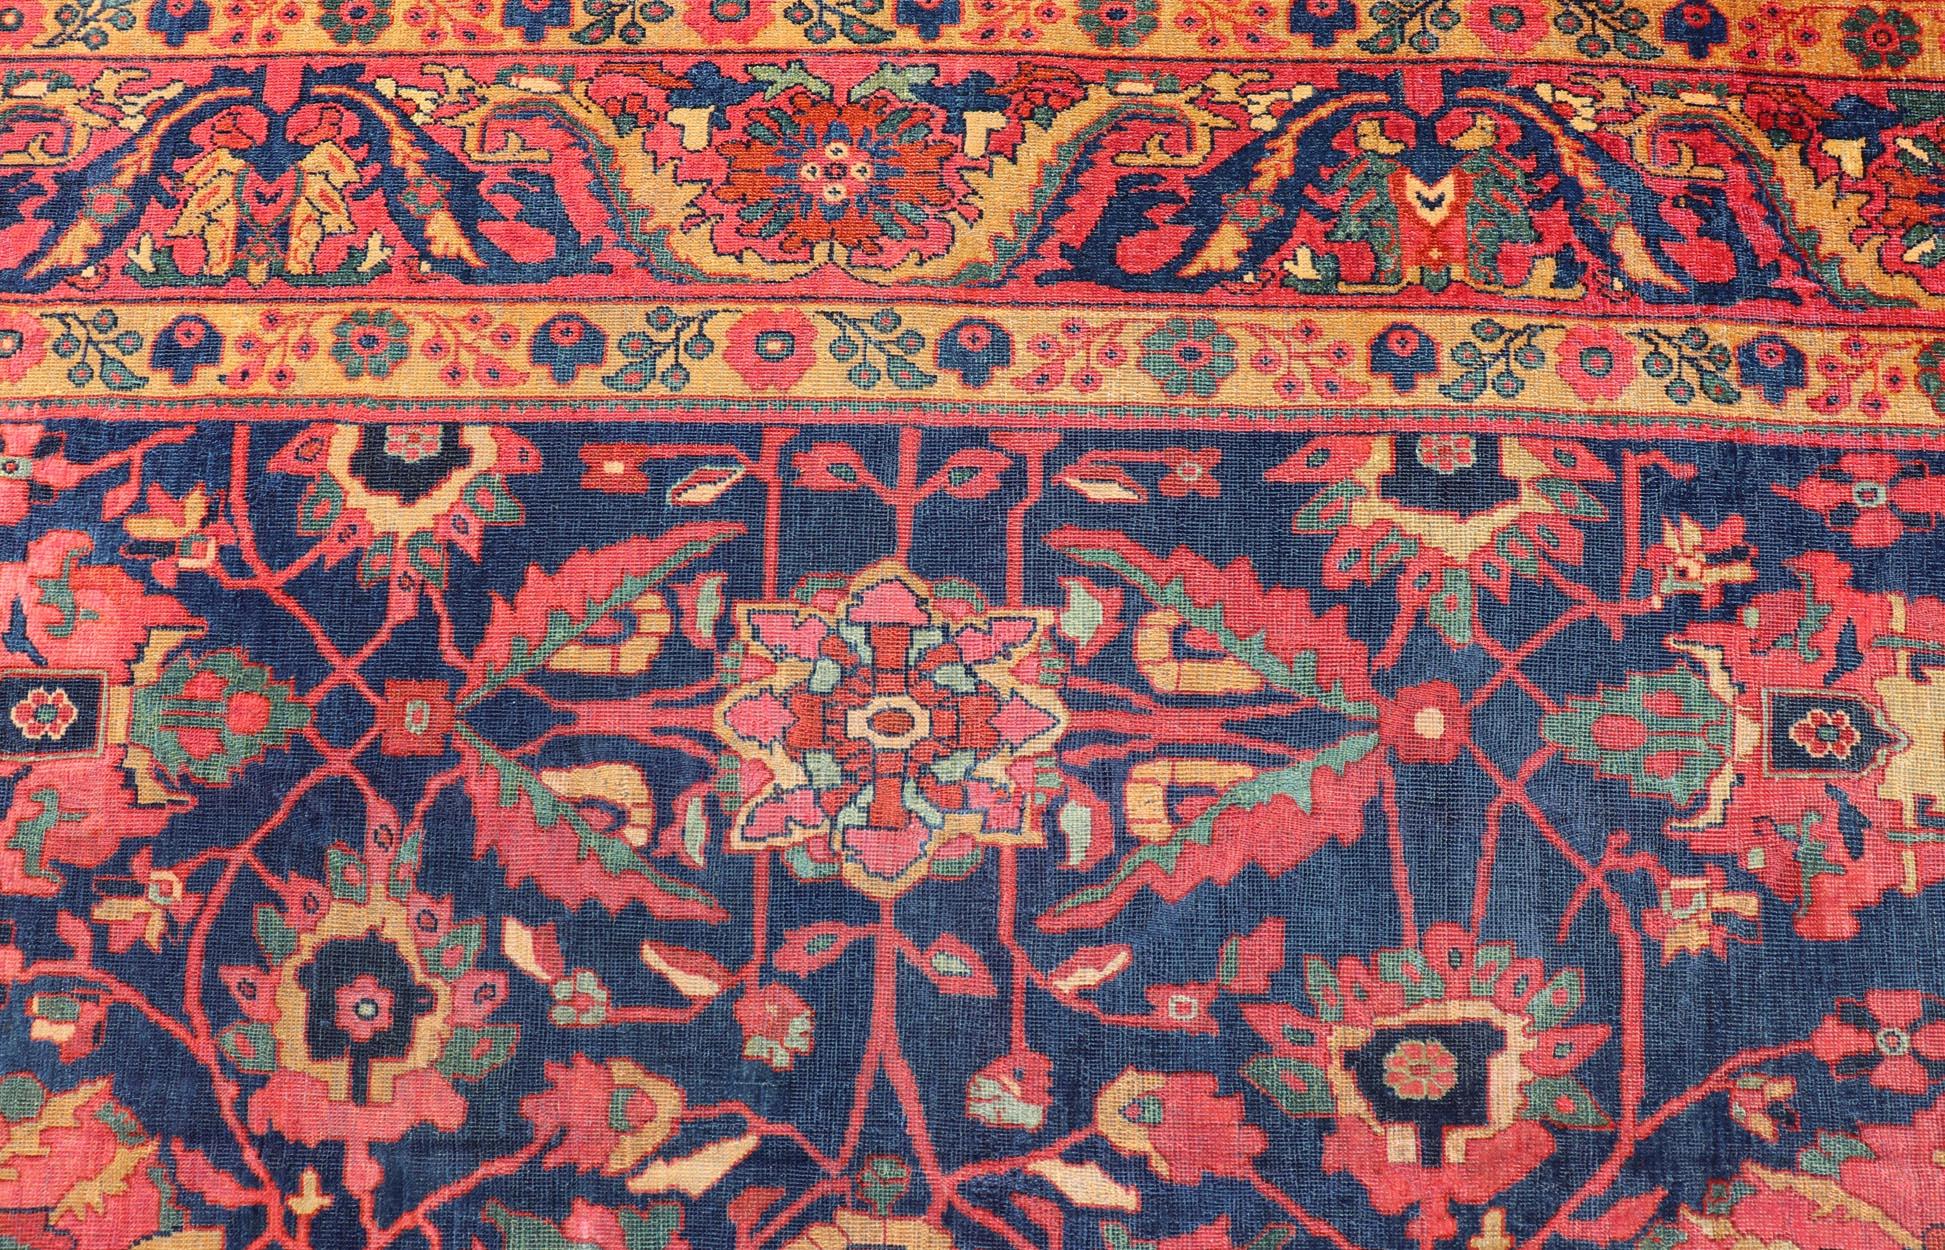 Antique Persian Sultanabad Rug With Large Scale Design in Blue, Red, and Gold. Keivan Woven Arts / rug / E-0908, country of origin / type: Iran / Sultanabad, circa 1890. 

Measures: 11'3 x 13'

This Persian Antique Sultanabad draws heavily from